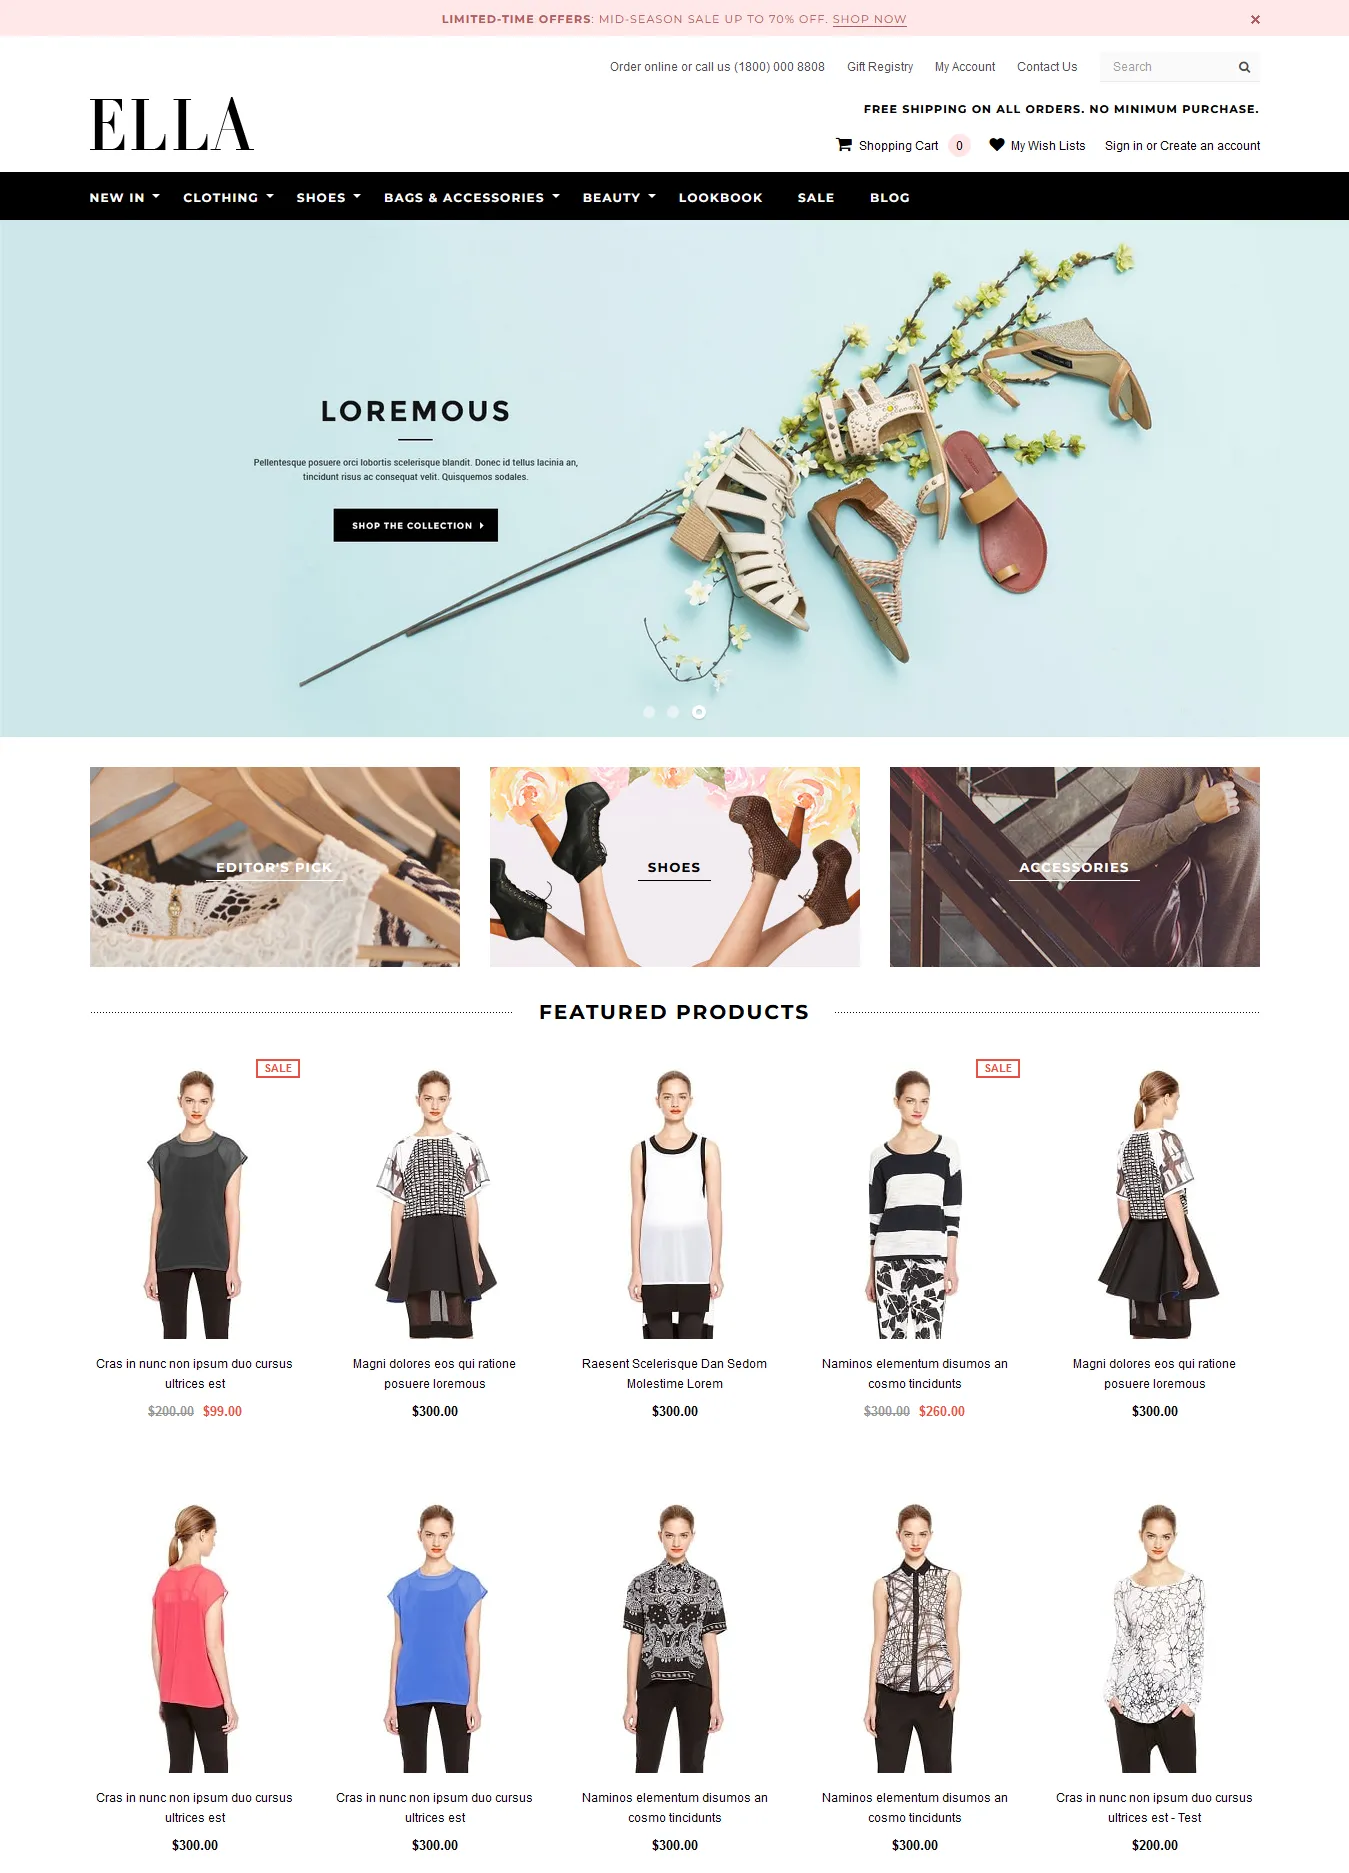 ELLA is one of the most popular & beautifully designed multipurpose responsive 3dcart templates. It can be used for any type of store, but ideal for clothing & fashion stores.